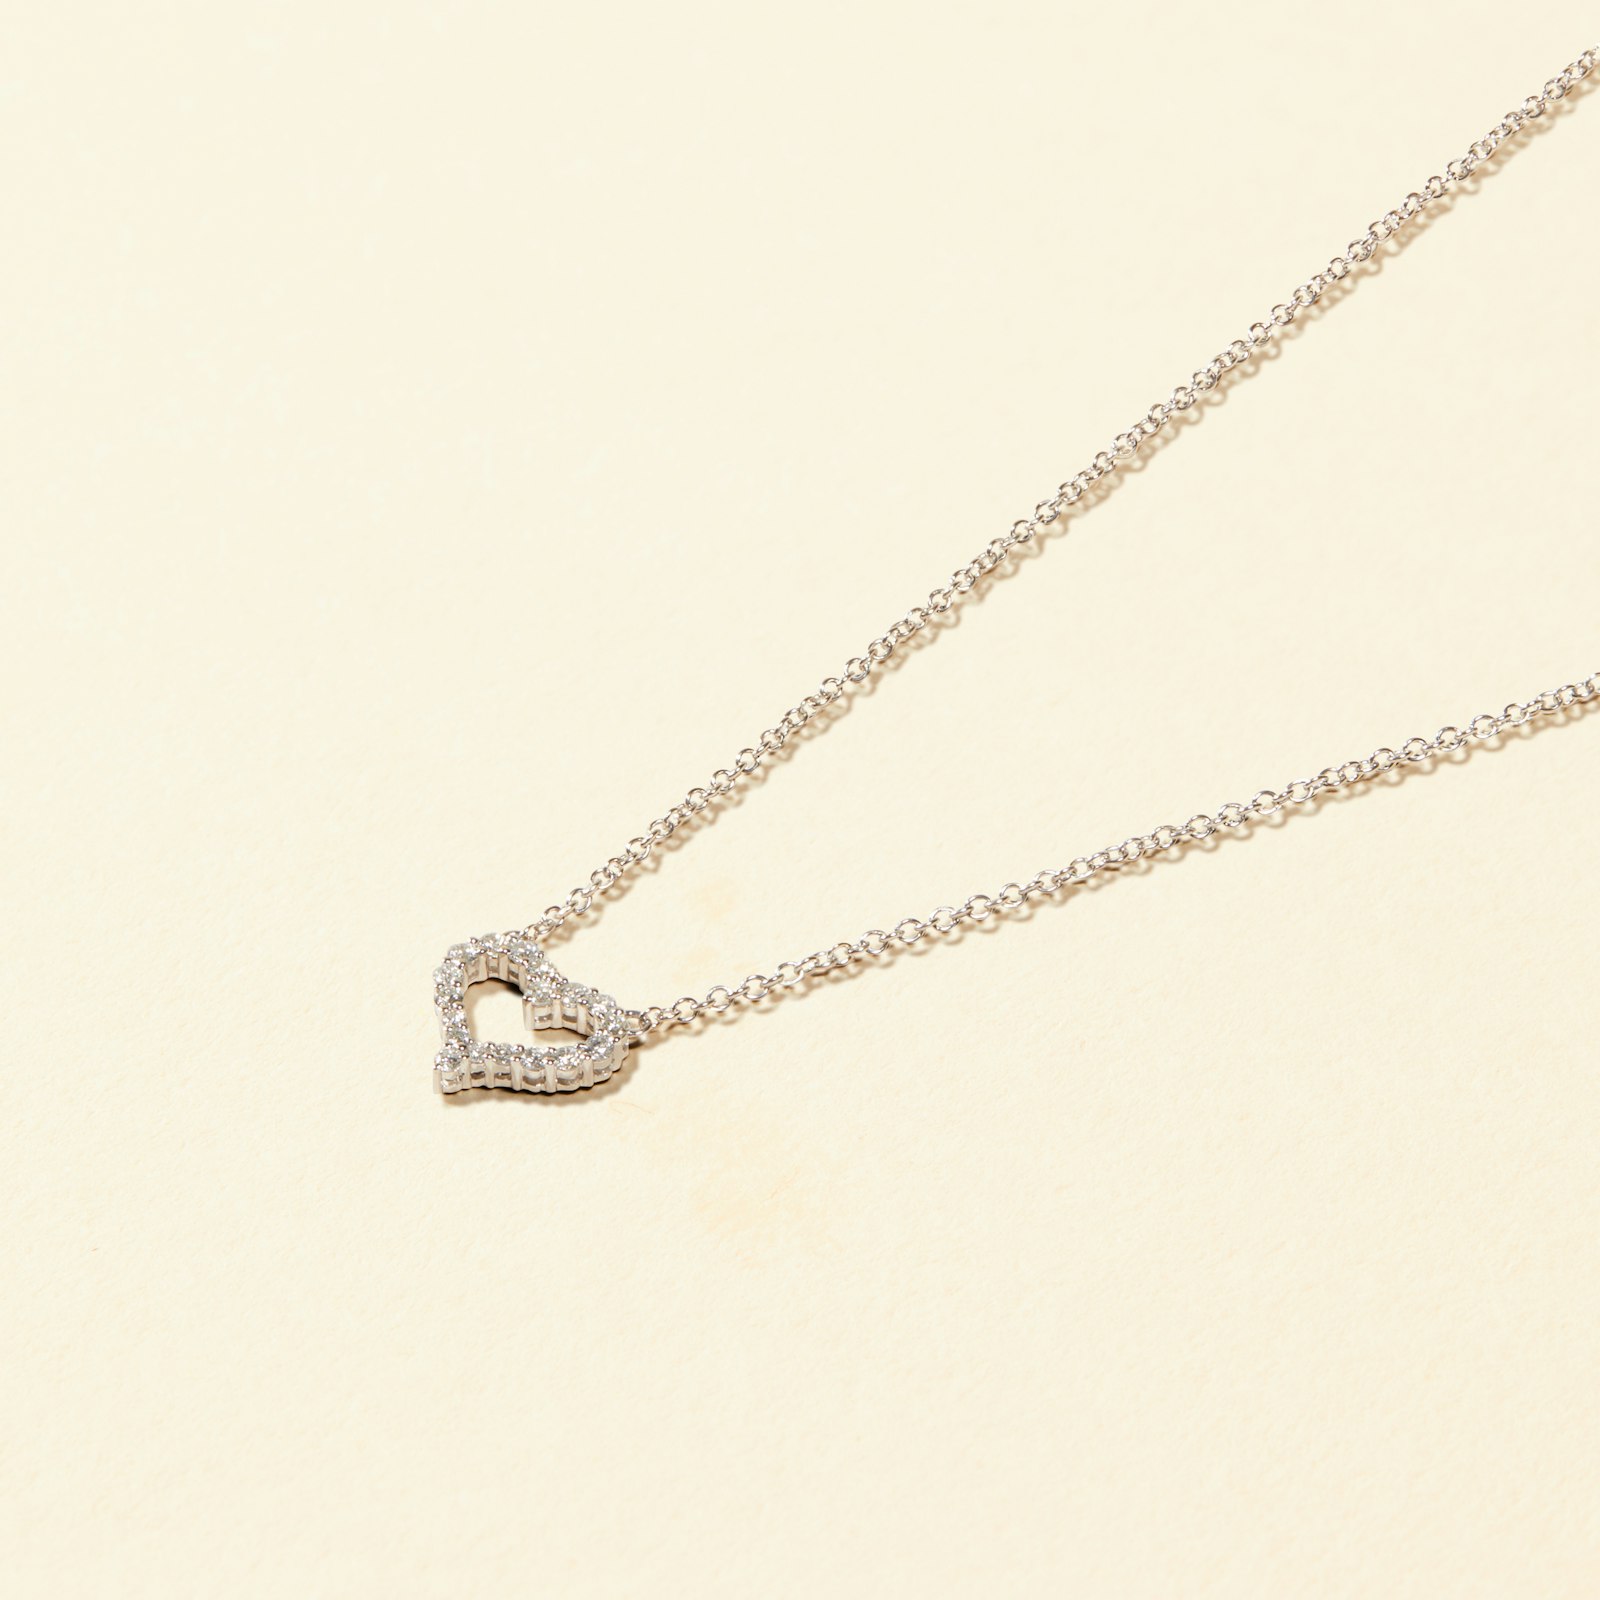 Swoon Diamond Heart Necklace_White Gold_Jewelry_Product_1x1_0158.jpg